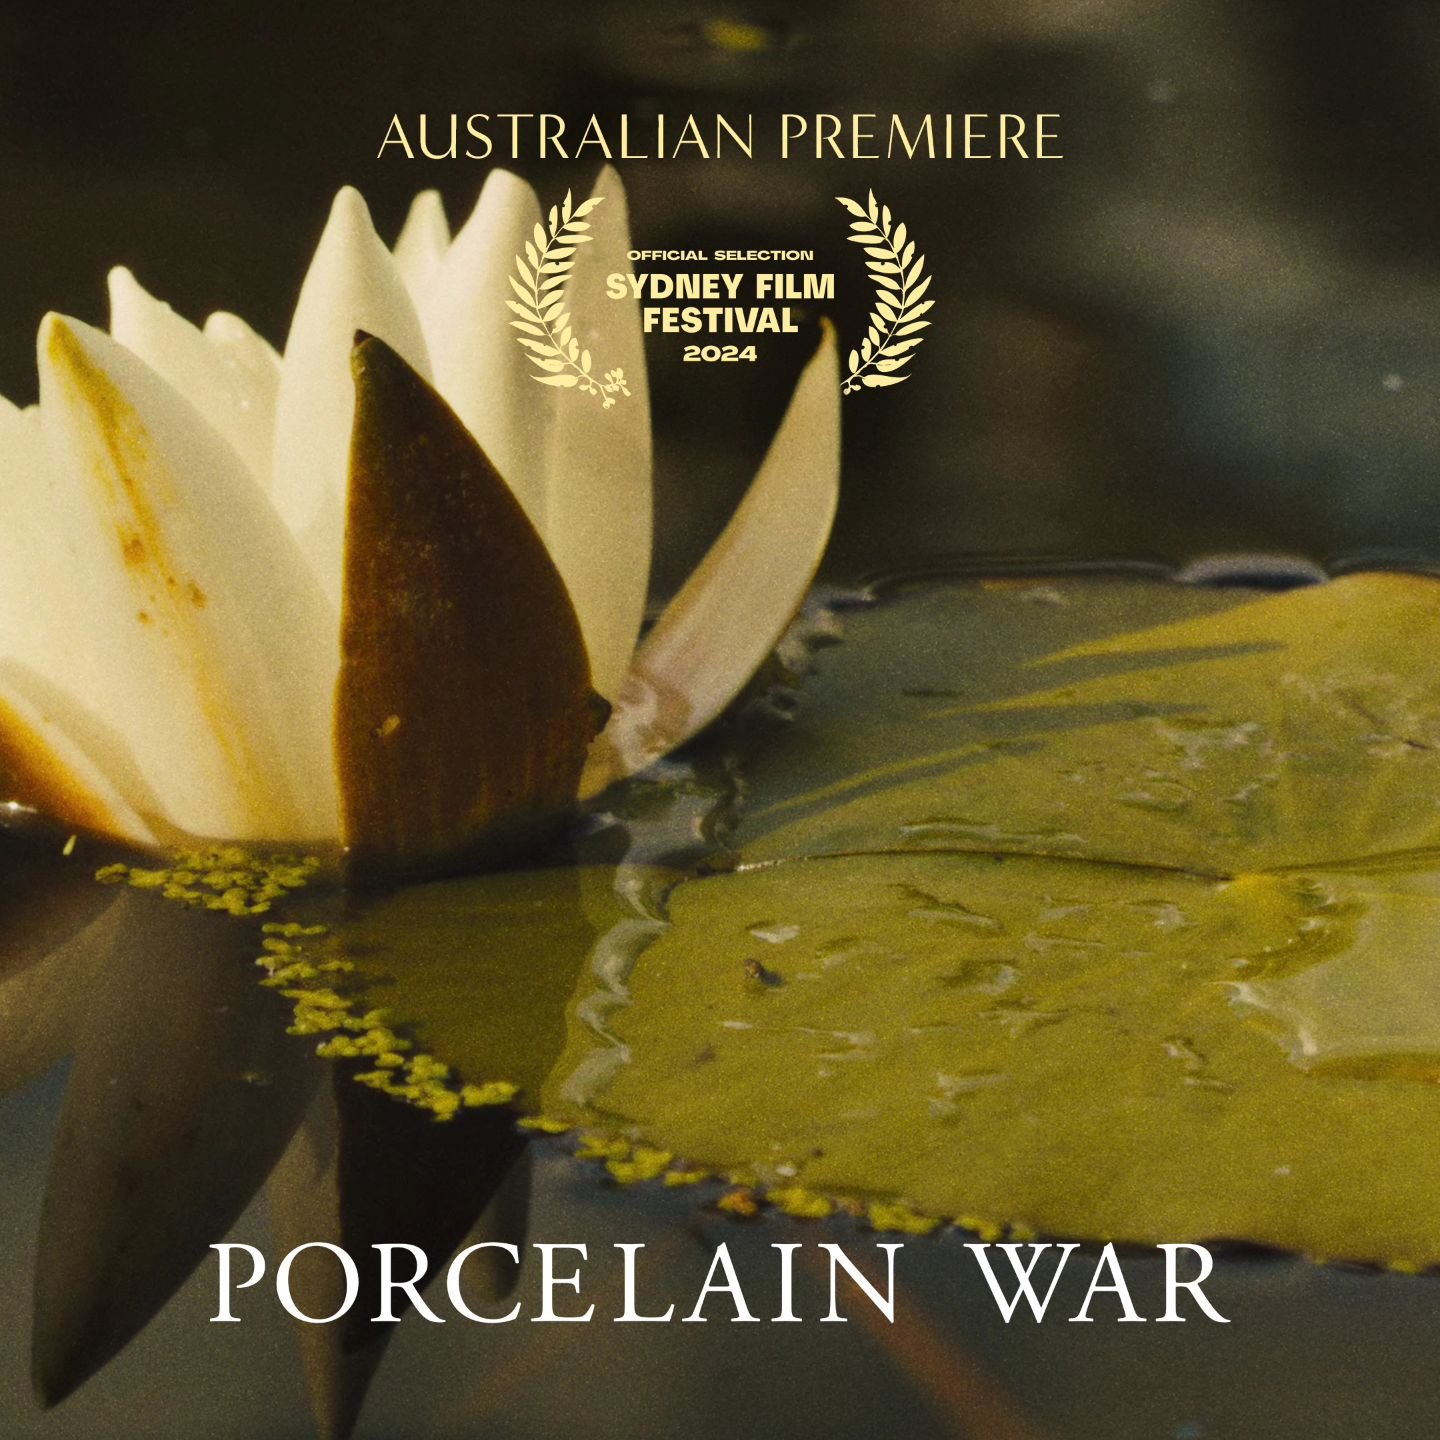 Porcelain War&rsquo;s Australian premiere is especially meaningful. An international creative collaboration was at the heart of telling this story. Our team was a fusion of Ukrainian, Australian, and American filmmakers coming together, no matter the